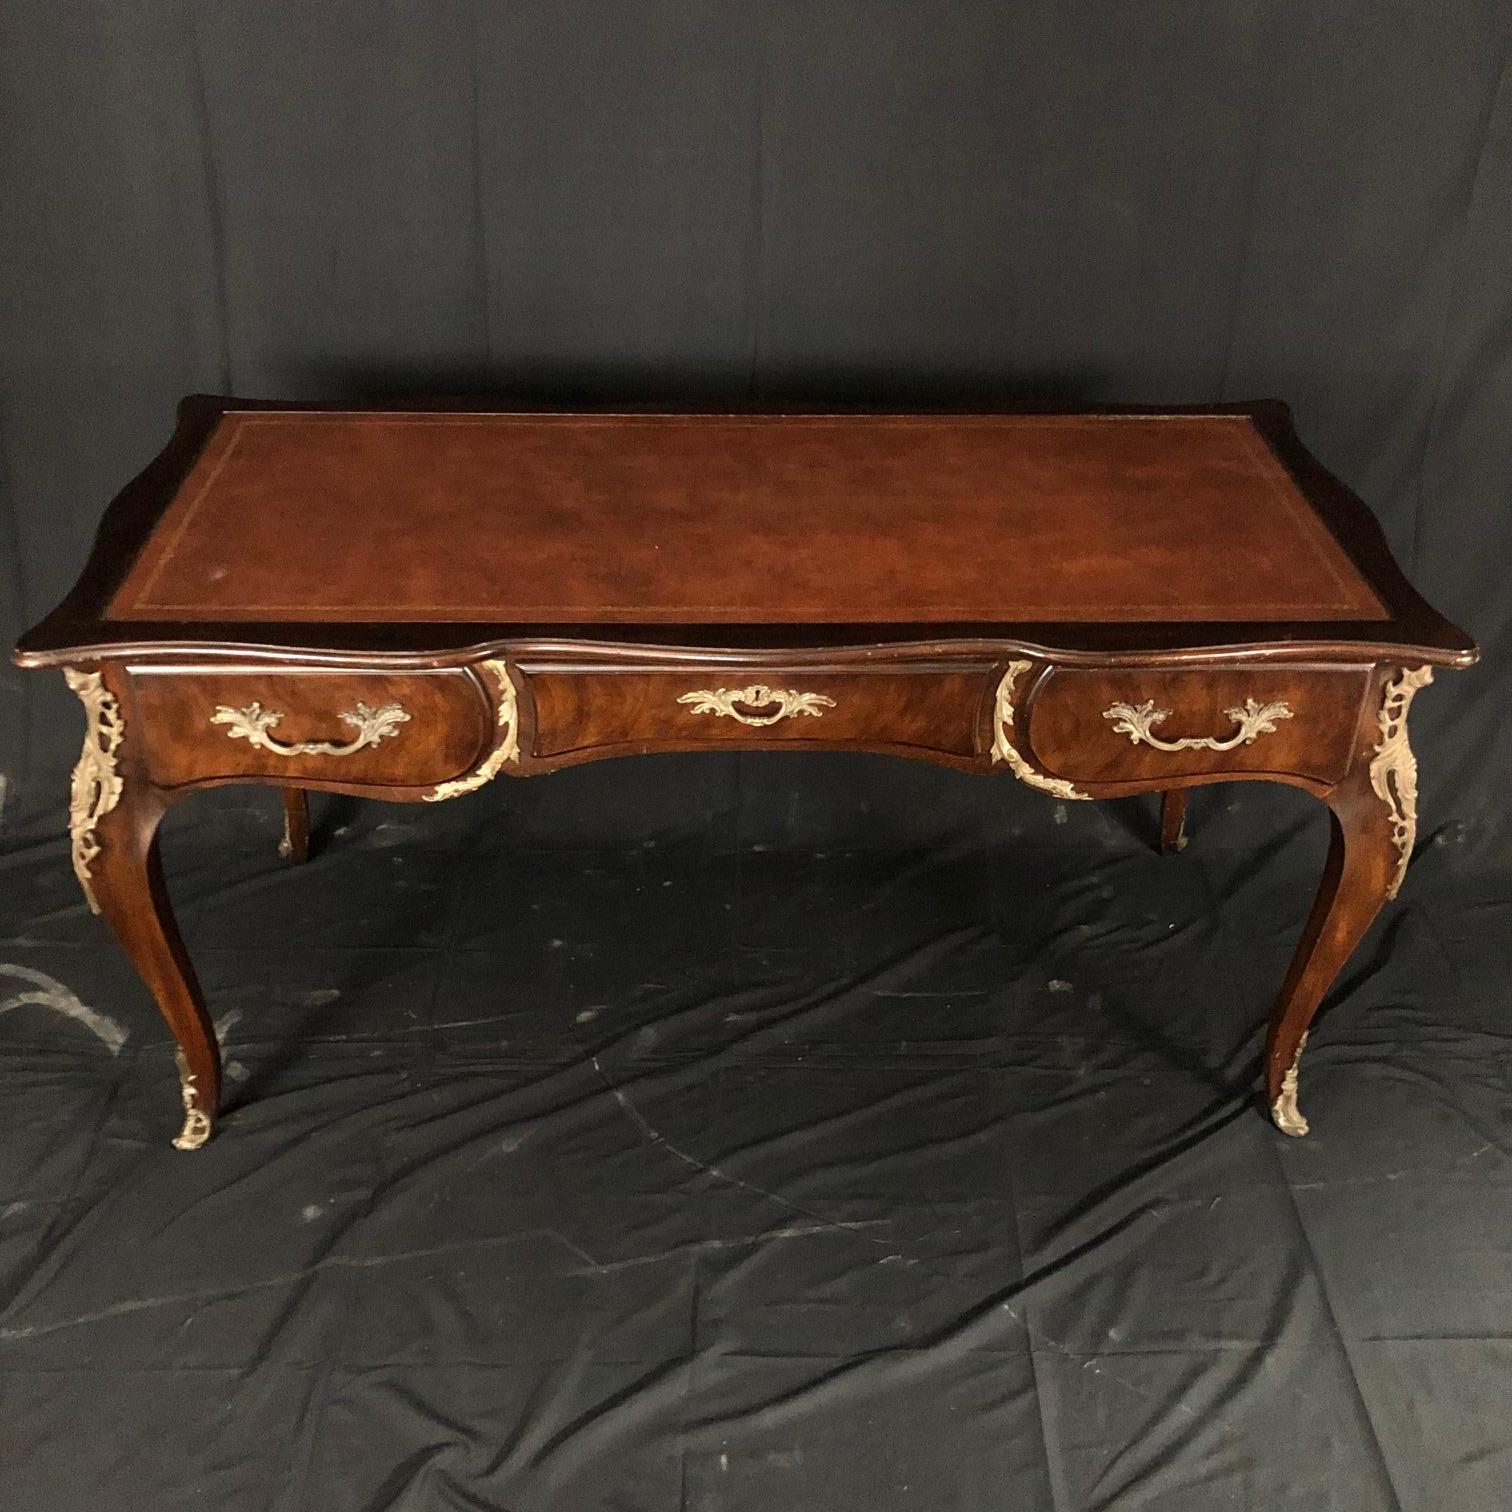 French Louis XV style walnut bureau plat desk raised on elegant cabriole legs with ormolu wraparound sabot. The 3 drawers are decorated with gilt bronze handles and the back is also adorned with gilt bronze so the desk would command the attention it